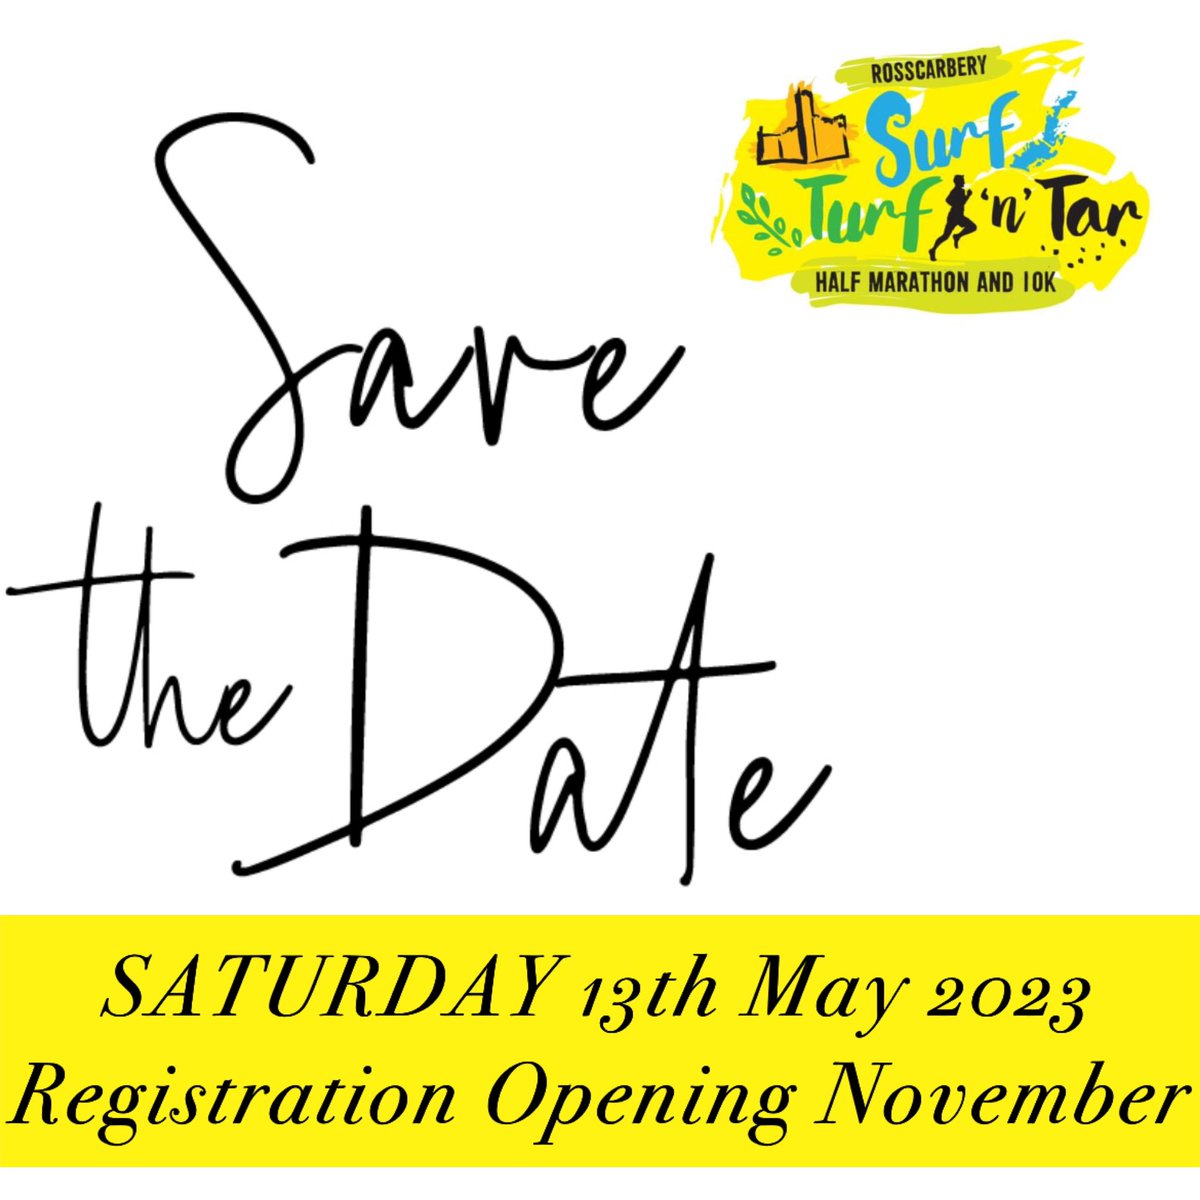 Save the Date - Who’s coming to Rosscarbery next May 13th … try something different 10K and Half marathon. Registration opening November! #rosscarbery #surfturfntar #10k #halfmarathon #westcork @CelticRossHotel #trysomethingdifferent